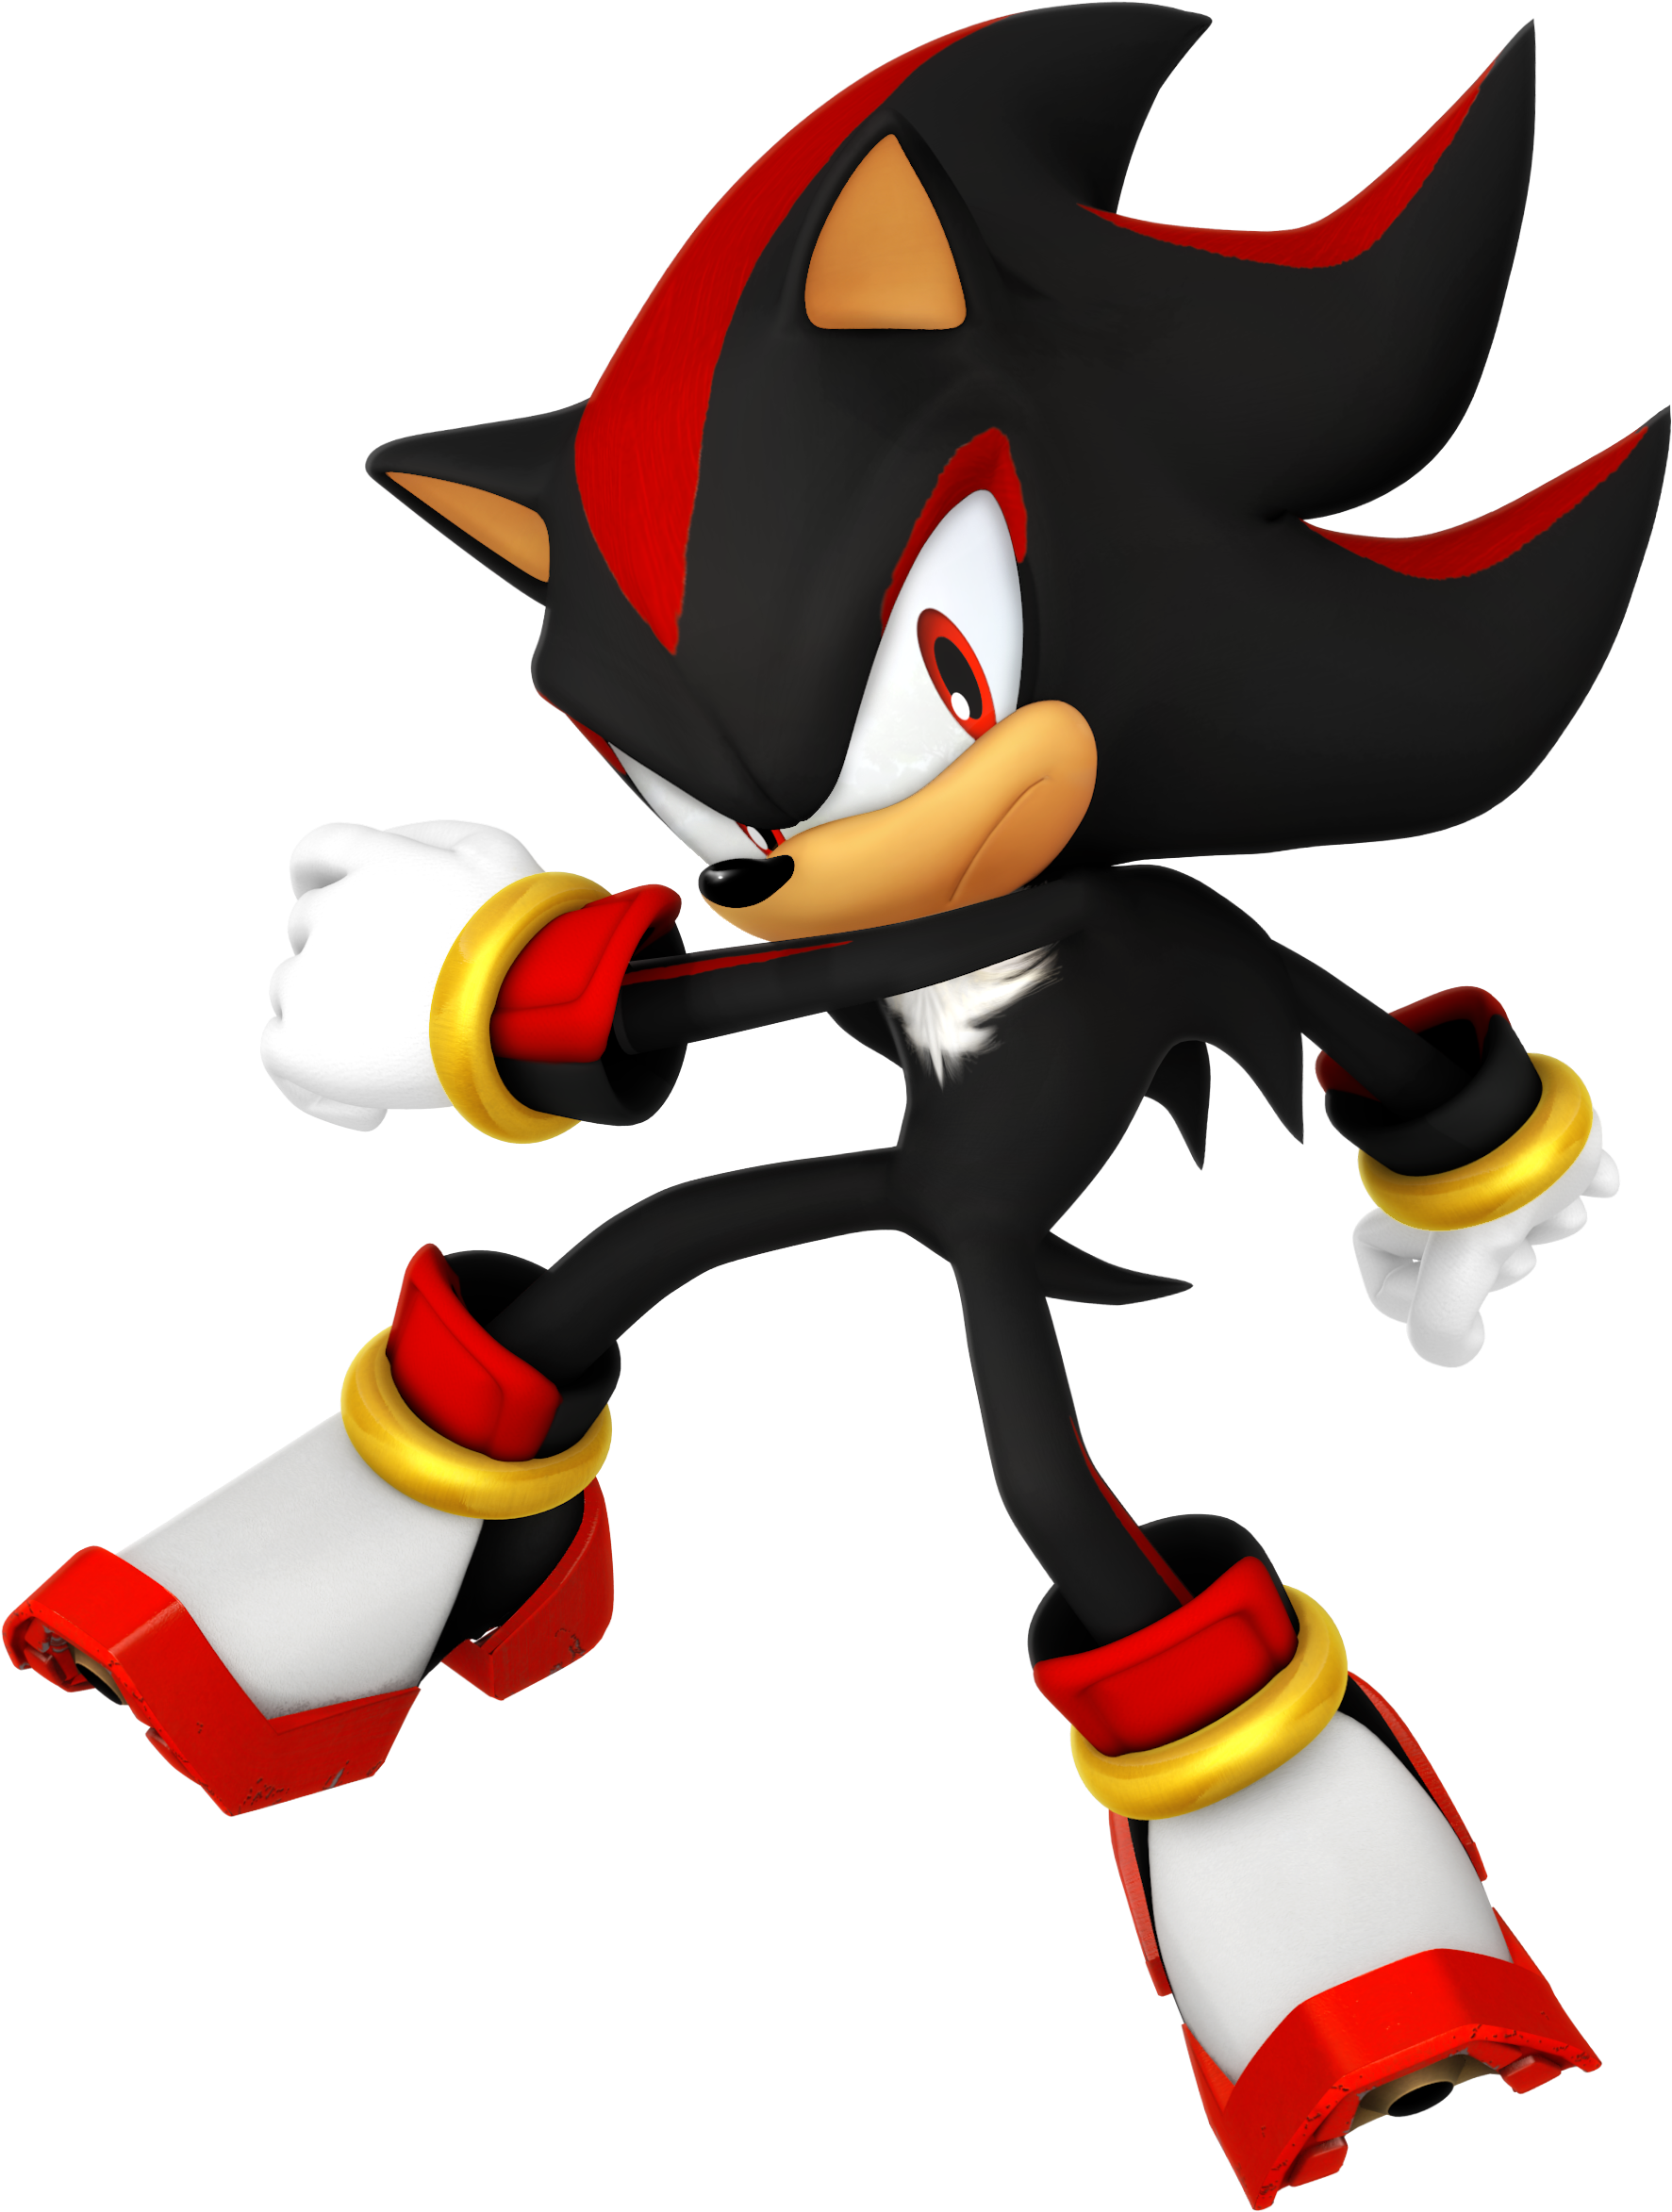 Shadow The Hedgehog By Nibroc-rock - Mario And Sonic At The Olympic Winter Games Shadow (2500x2500)